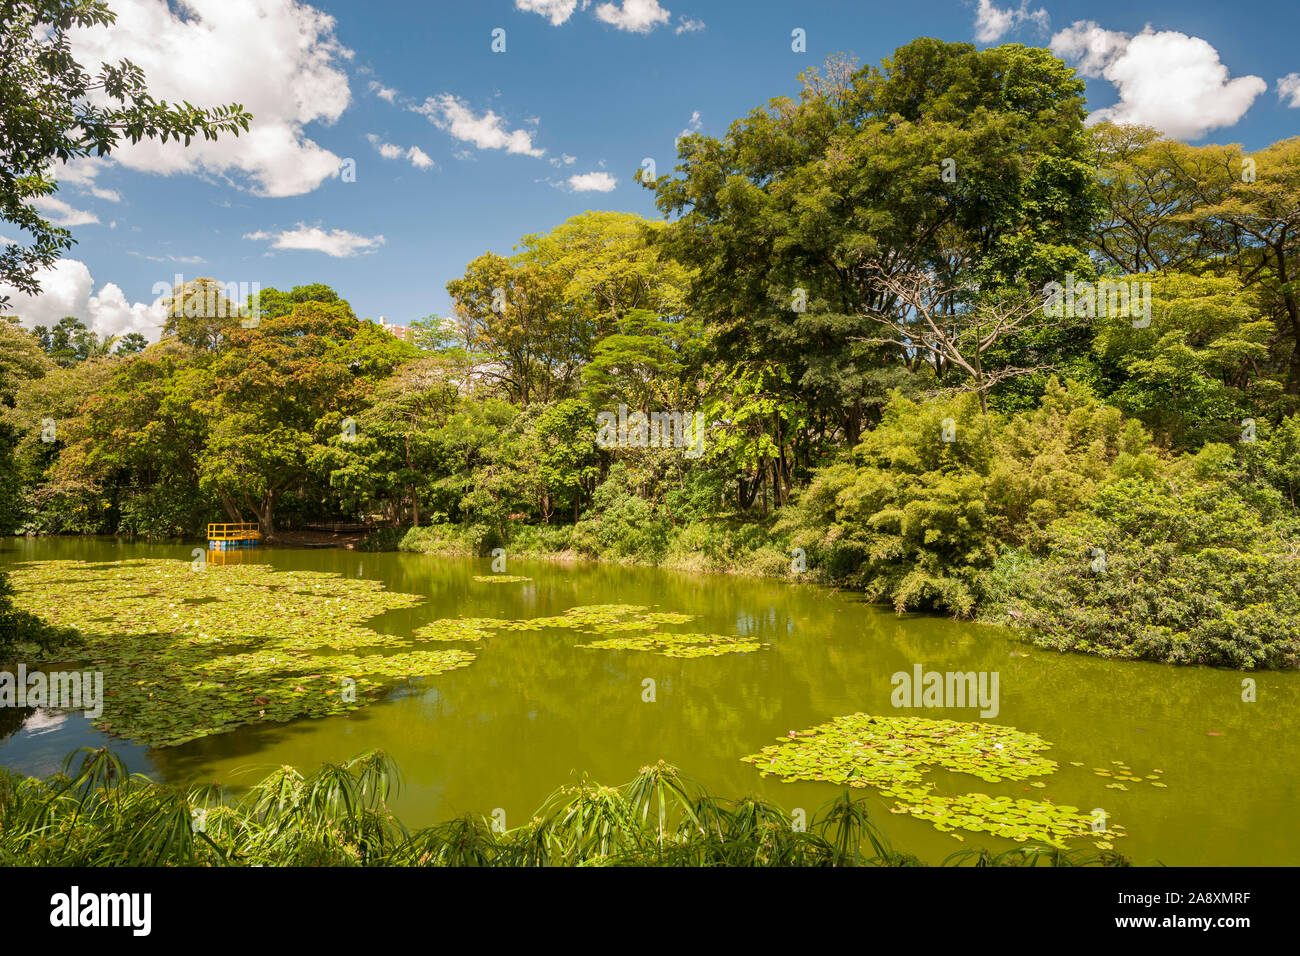 The botanical gardens in Medellin, Colombia. Stock Photo